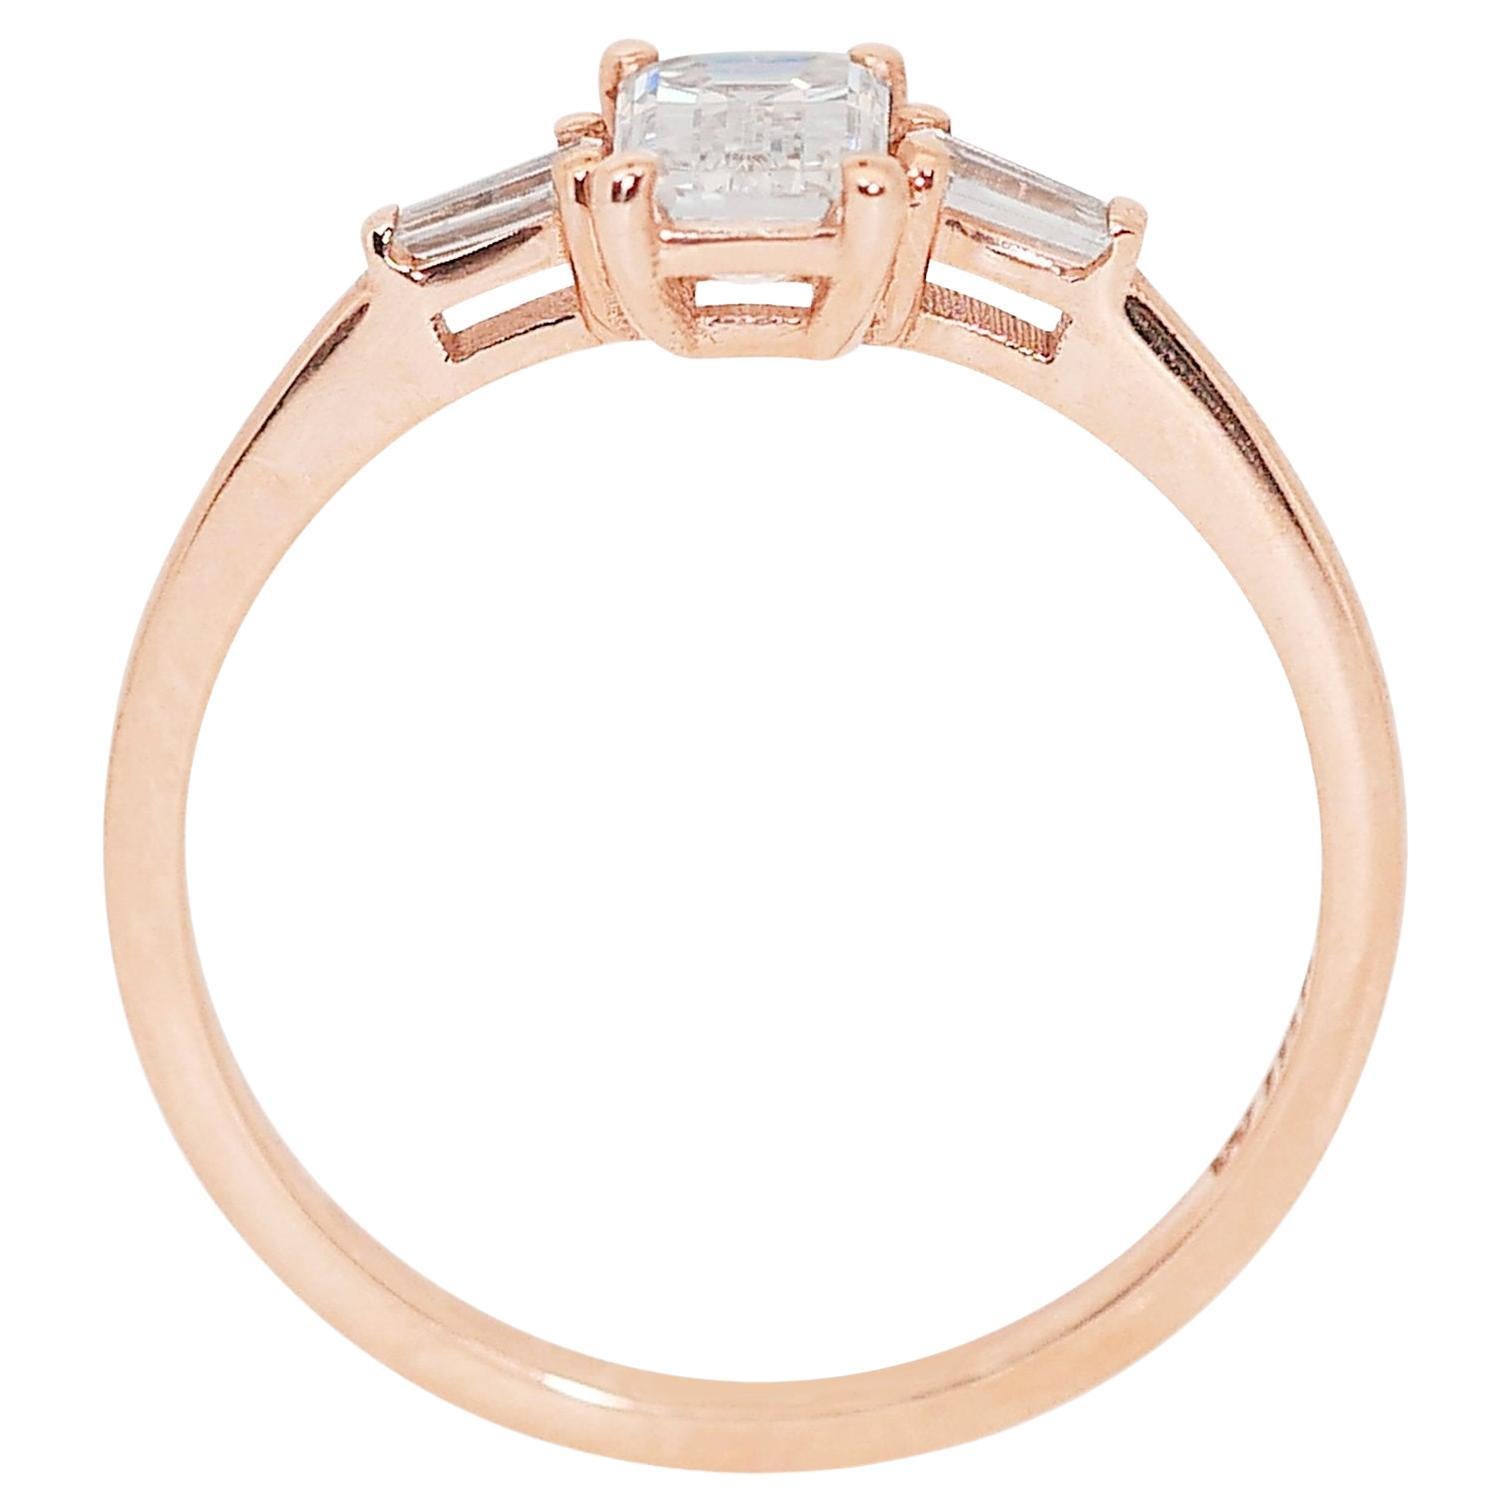 Elegant 0.90ct Emerald-Cut Diamond 3-Stone Ring in 18k Rose Gold - GIA Certified For Sale 2